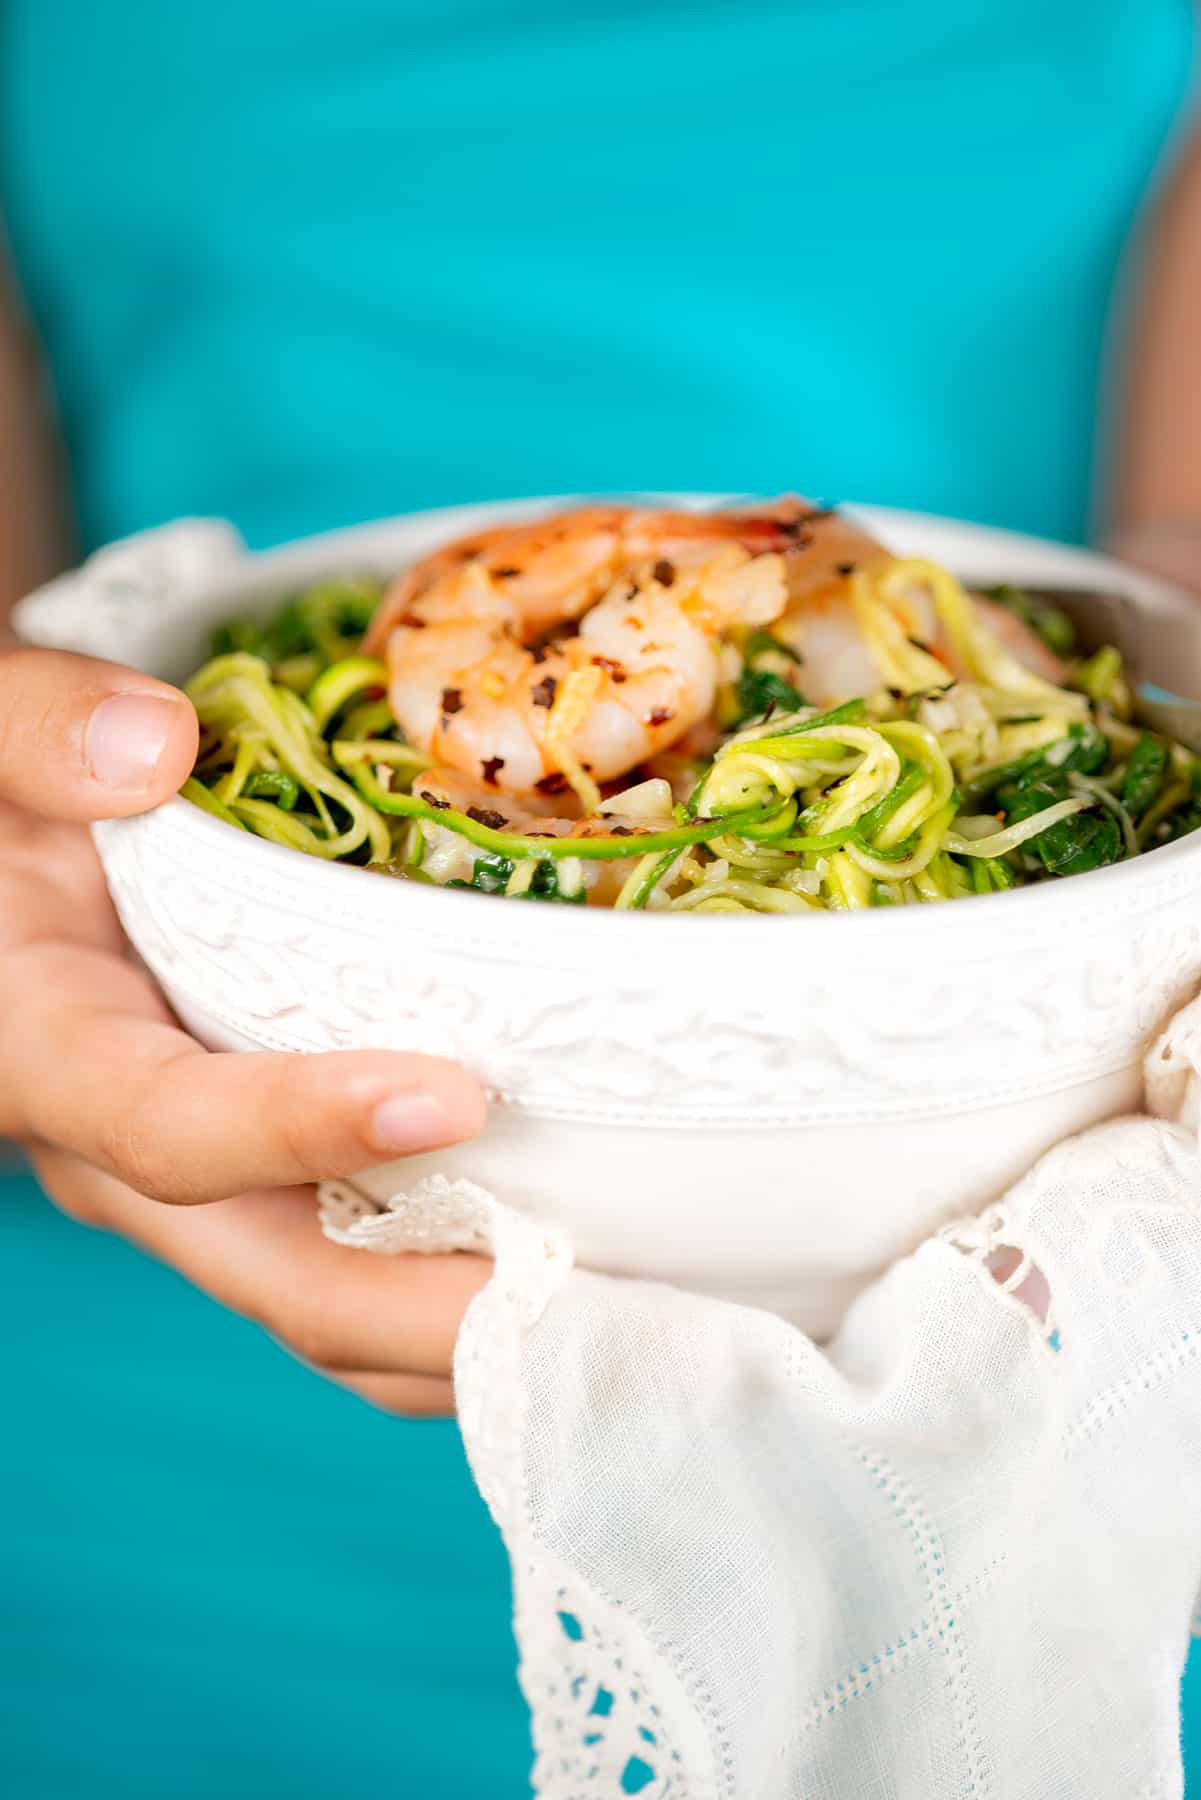 Zucchini noodles with shrimp scampi.